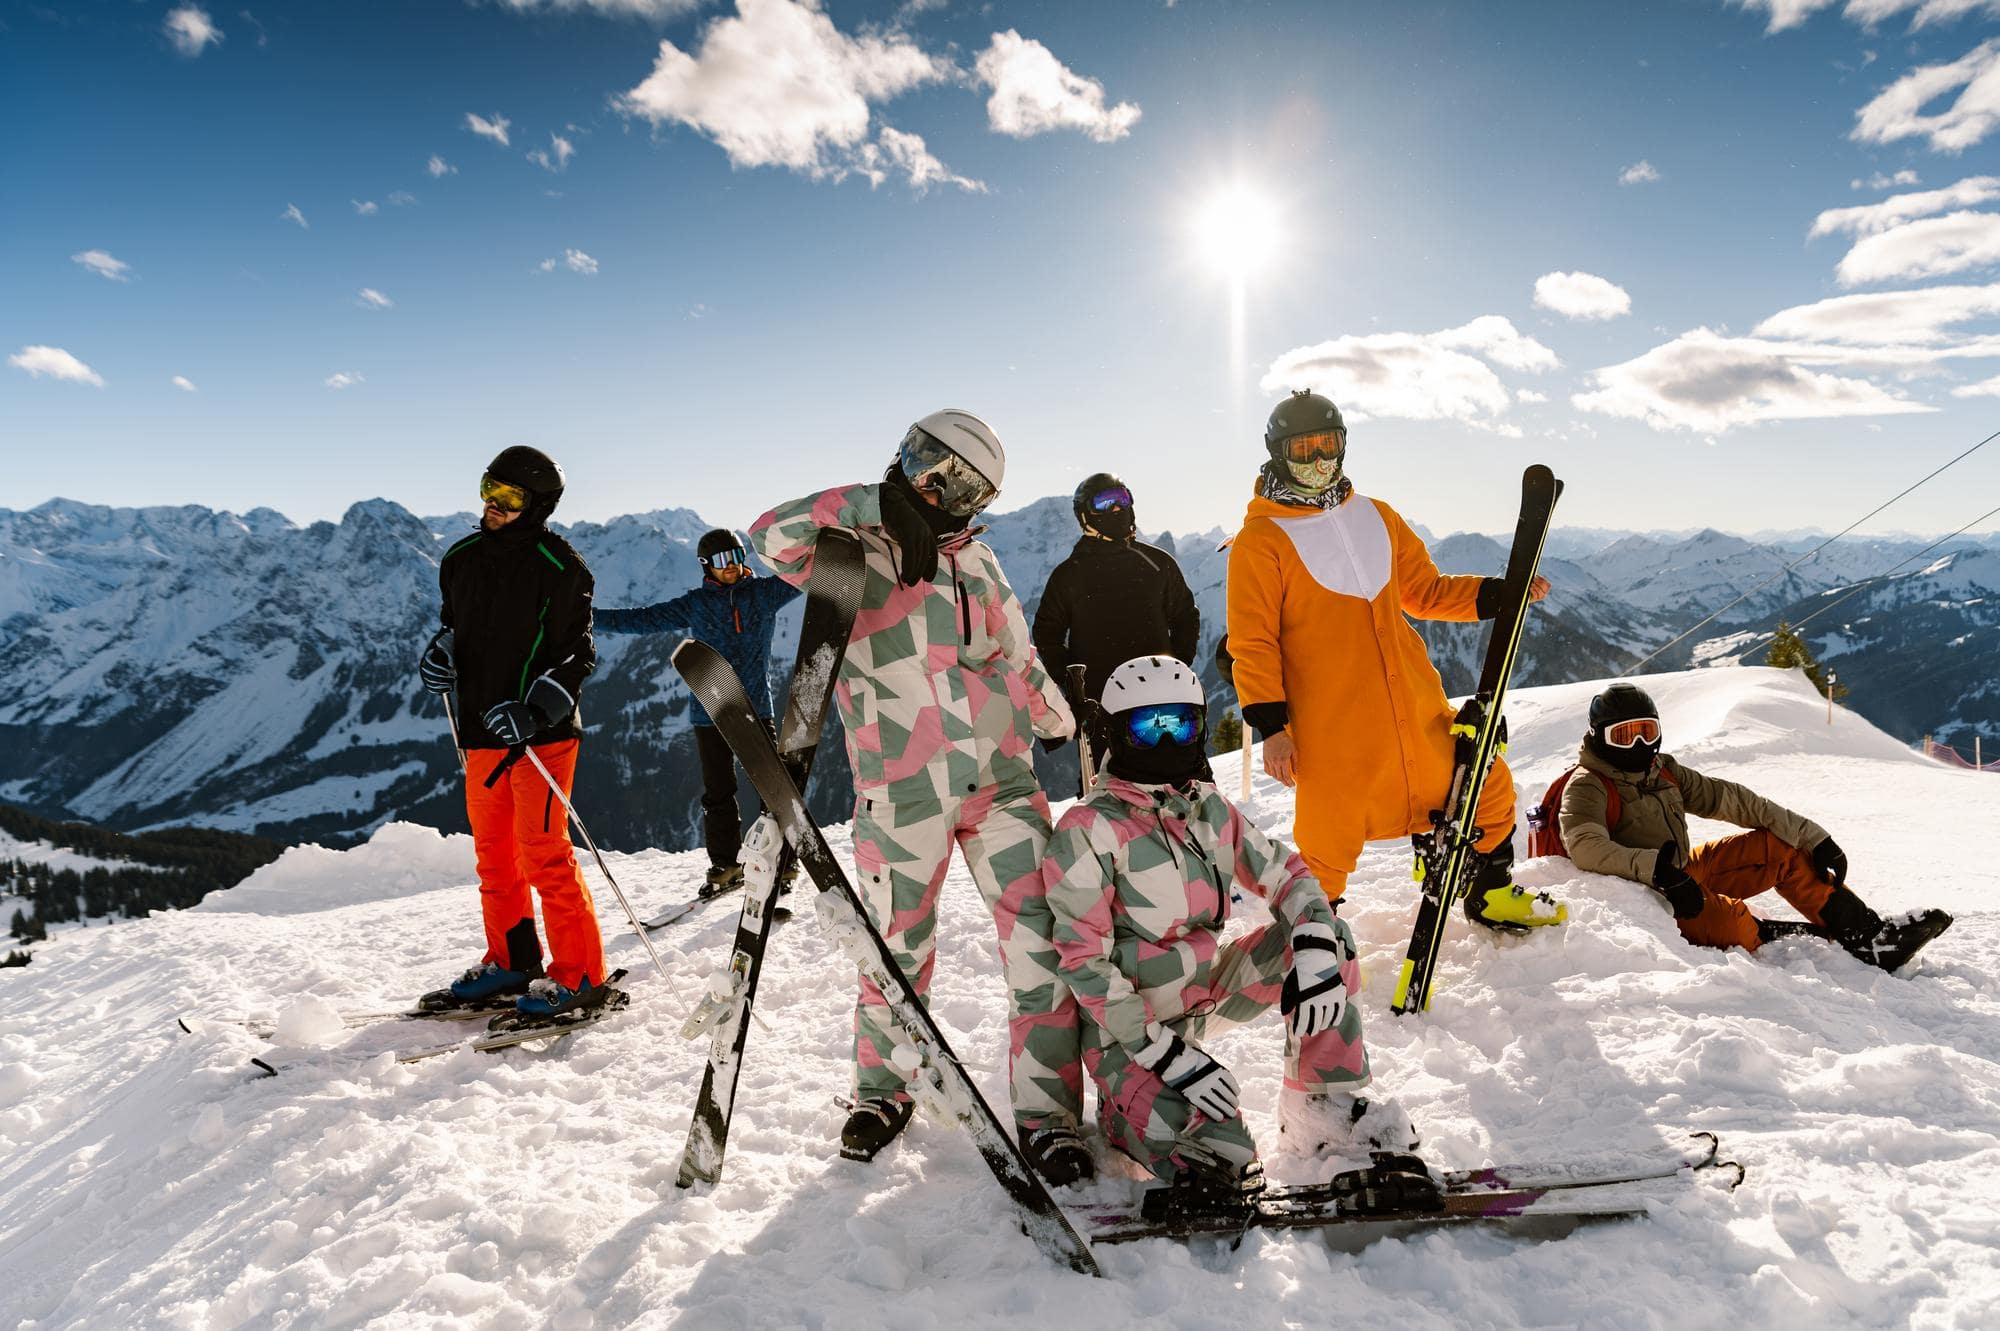 You are currently viewing Unique Gift Ideas for Skiers and Snowboarders that will Elevate their On-Slope Experience